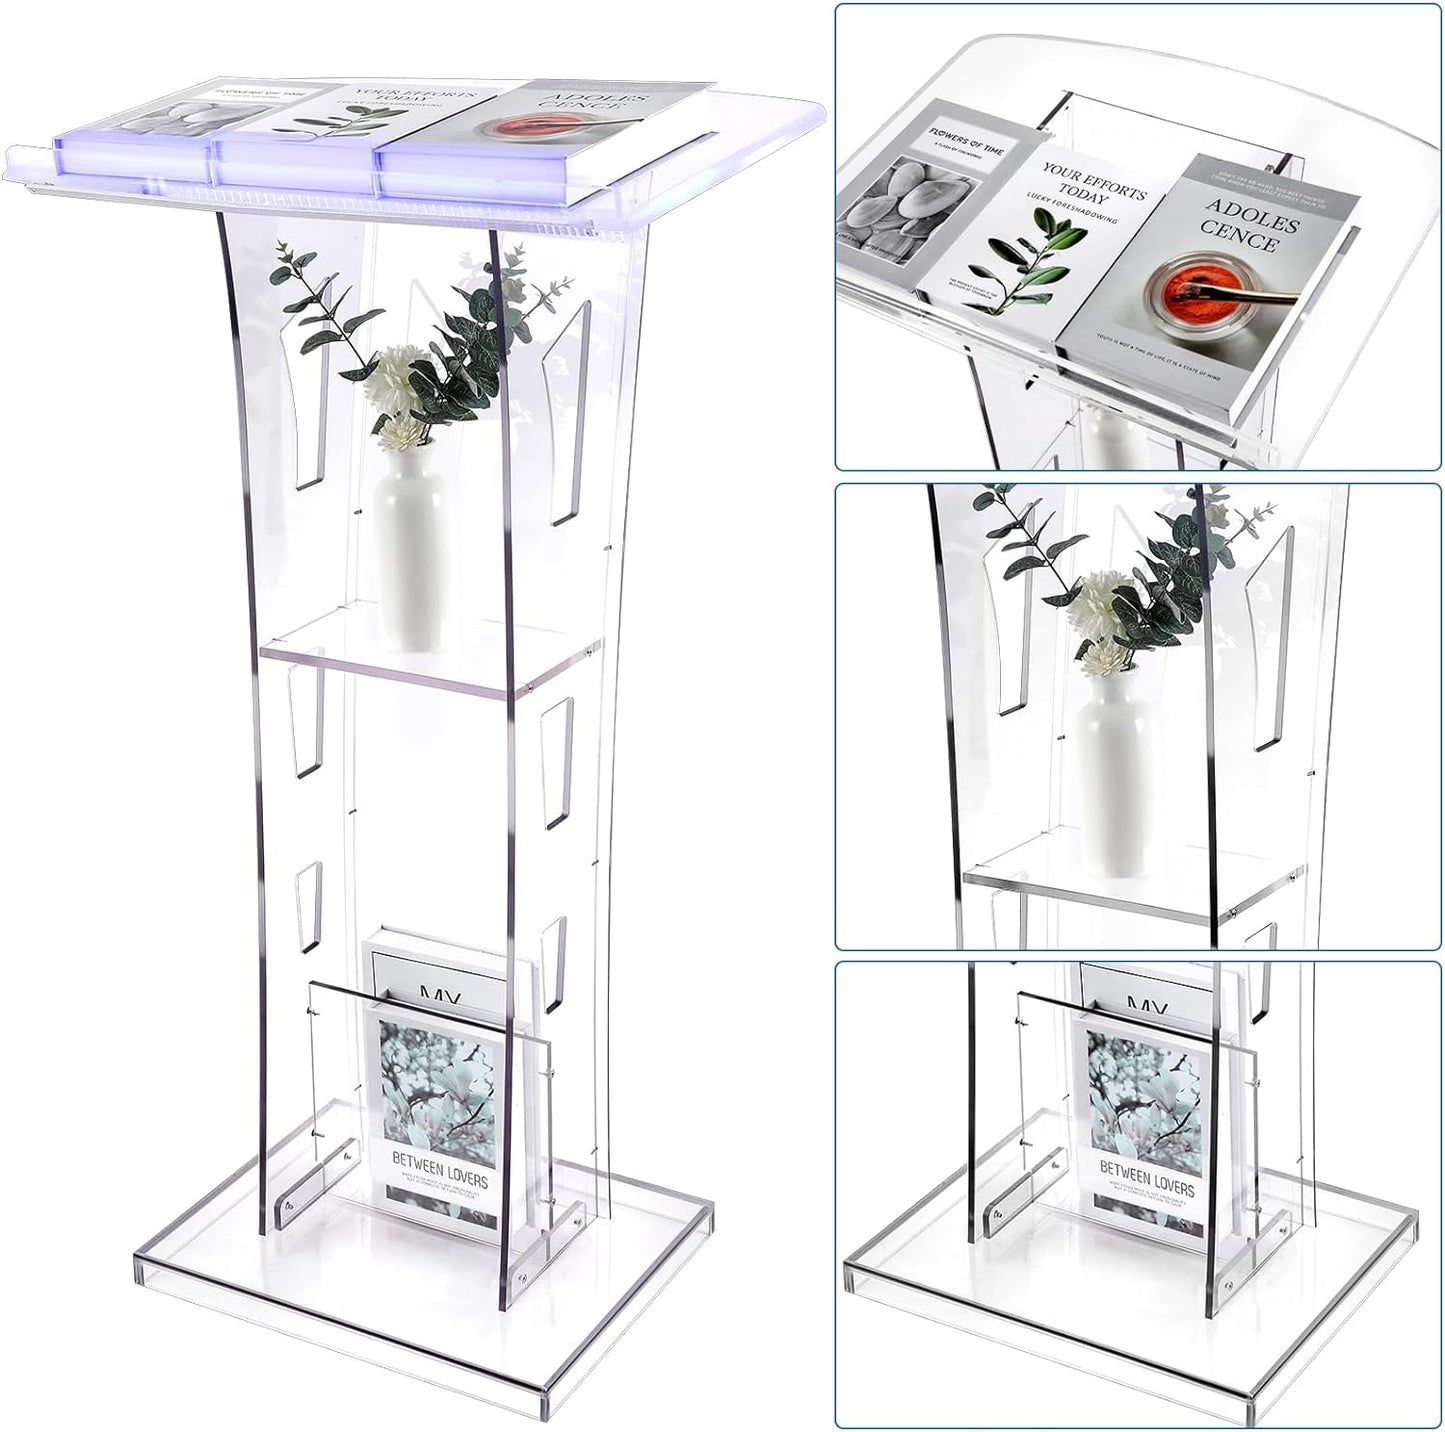 Acrylic Podium Stand with Led Light, Clear Podium with Storage Shelf, Portable Lecterns Pulpit for Church Wedding Classroom Conference Floor Standing Style, Slanted Top